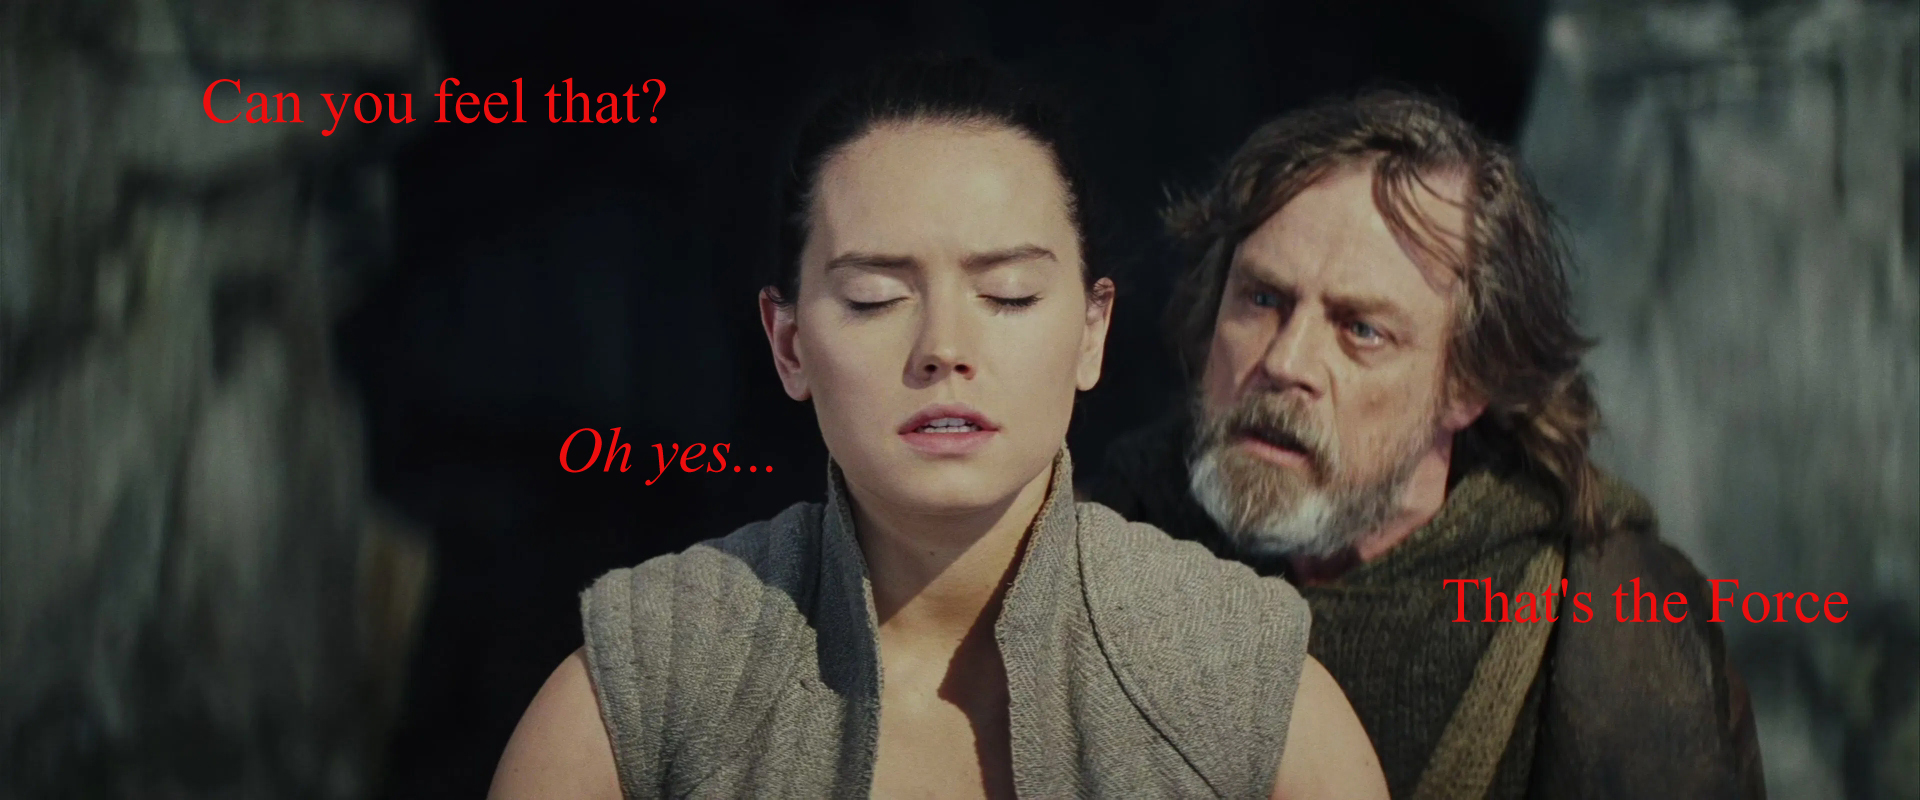 rey-and-luke-first-lesson-jpg.643373